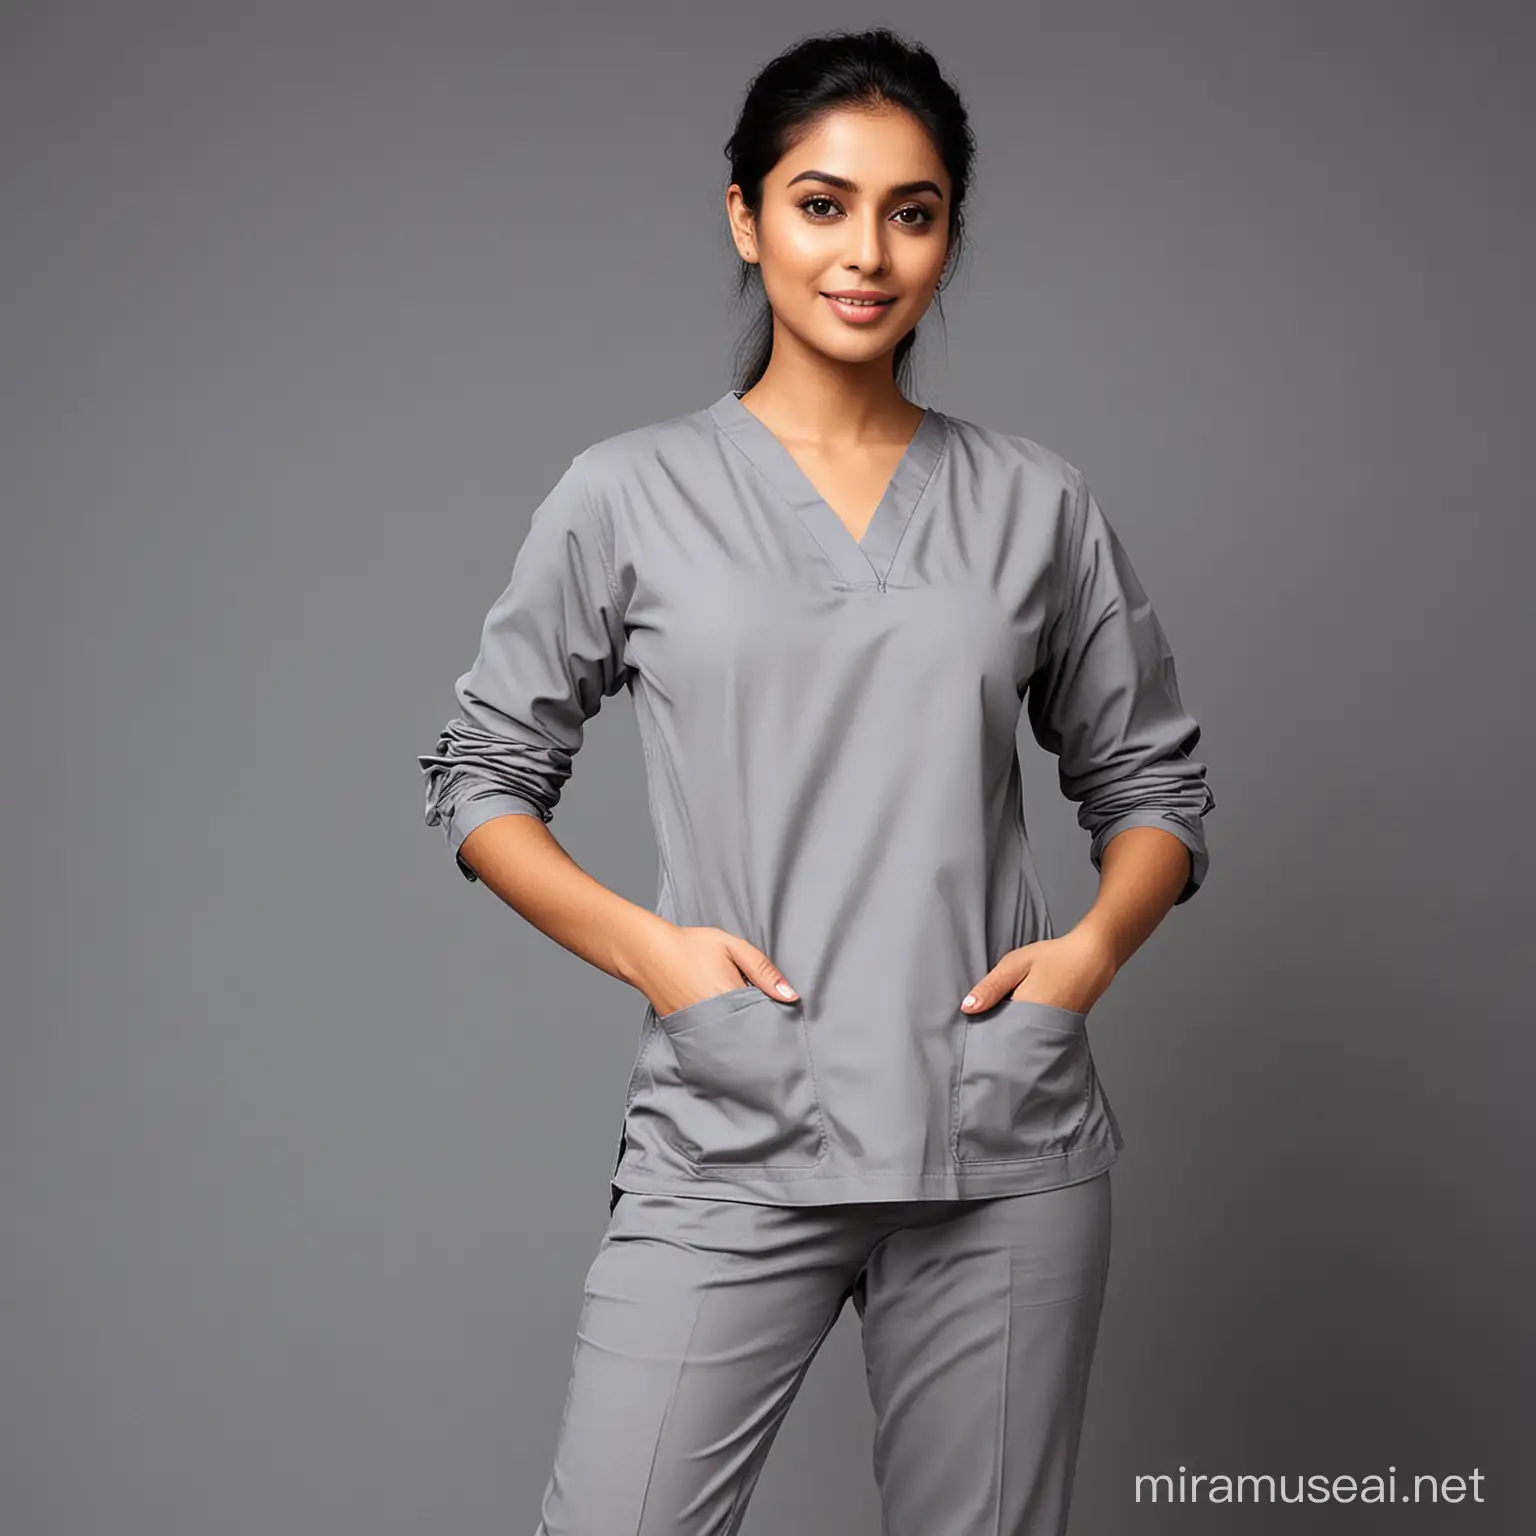 Indian model wearing Stylish Doctor Scrub Suit at her clinic